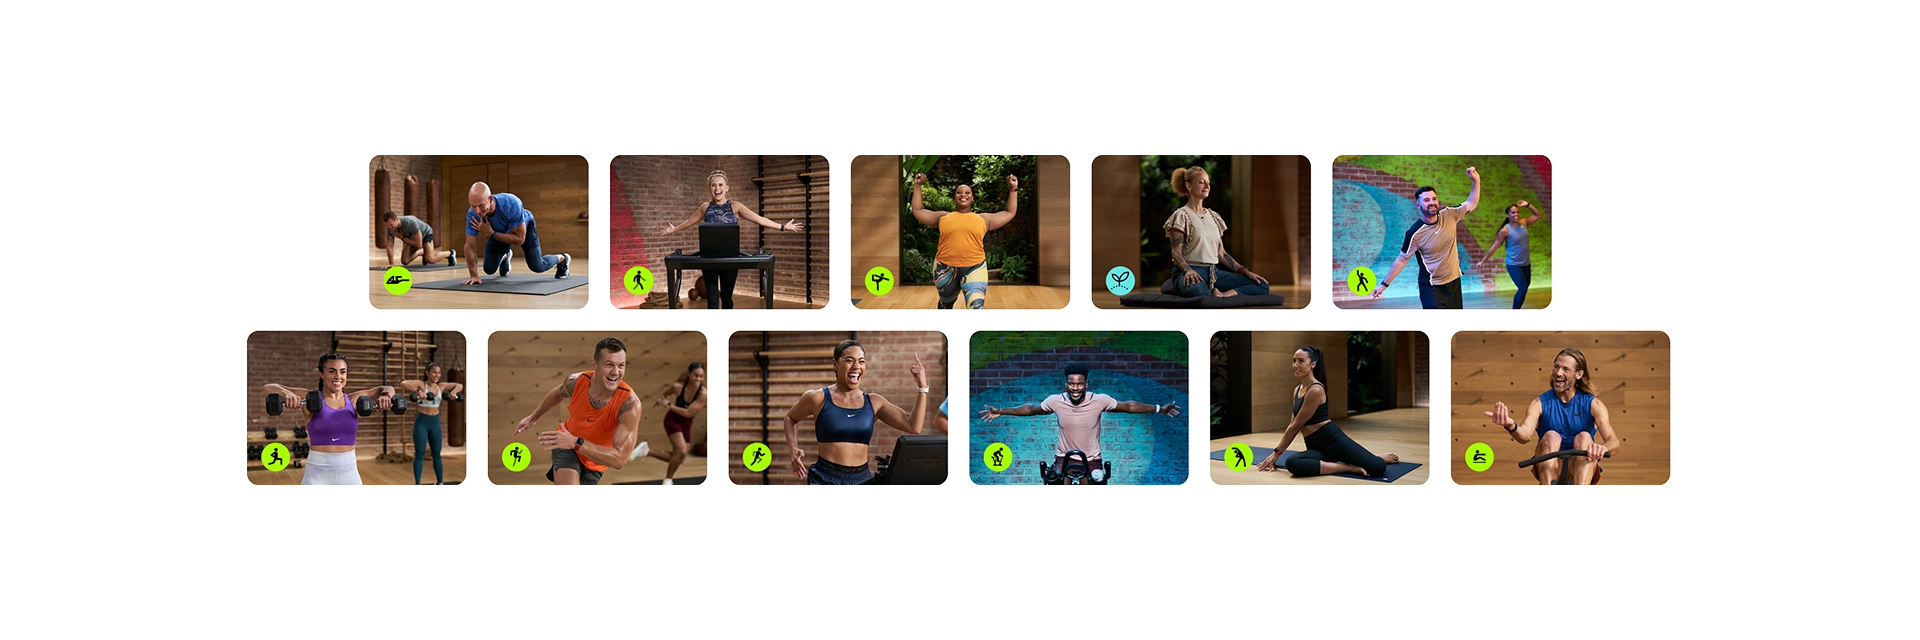 Apple Fitness+ Overview showing the benefits of the service.